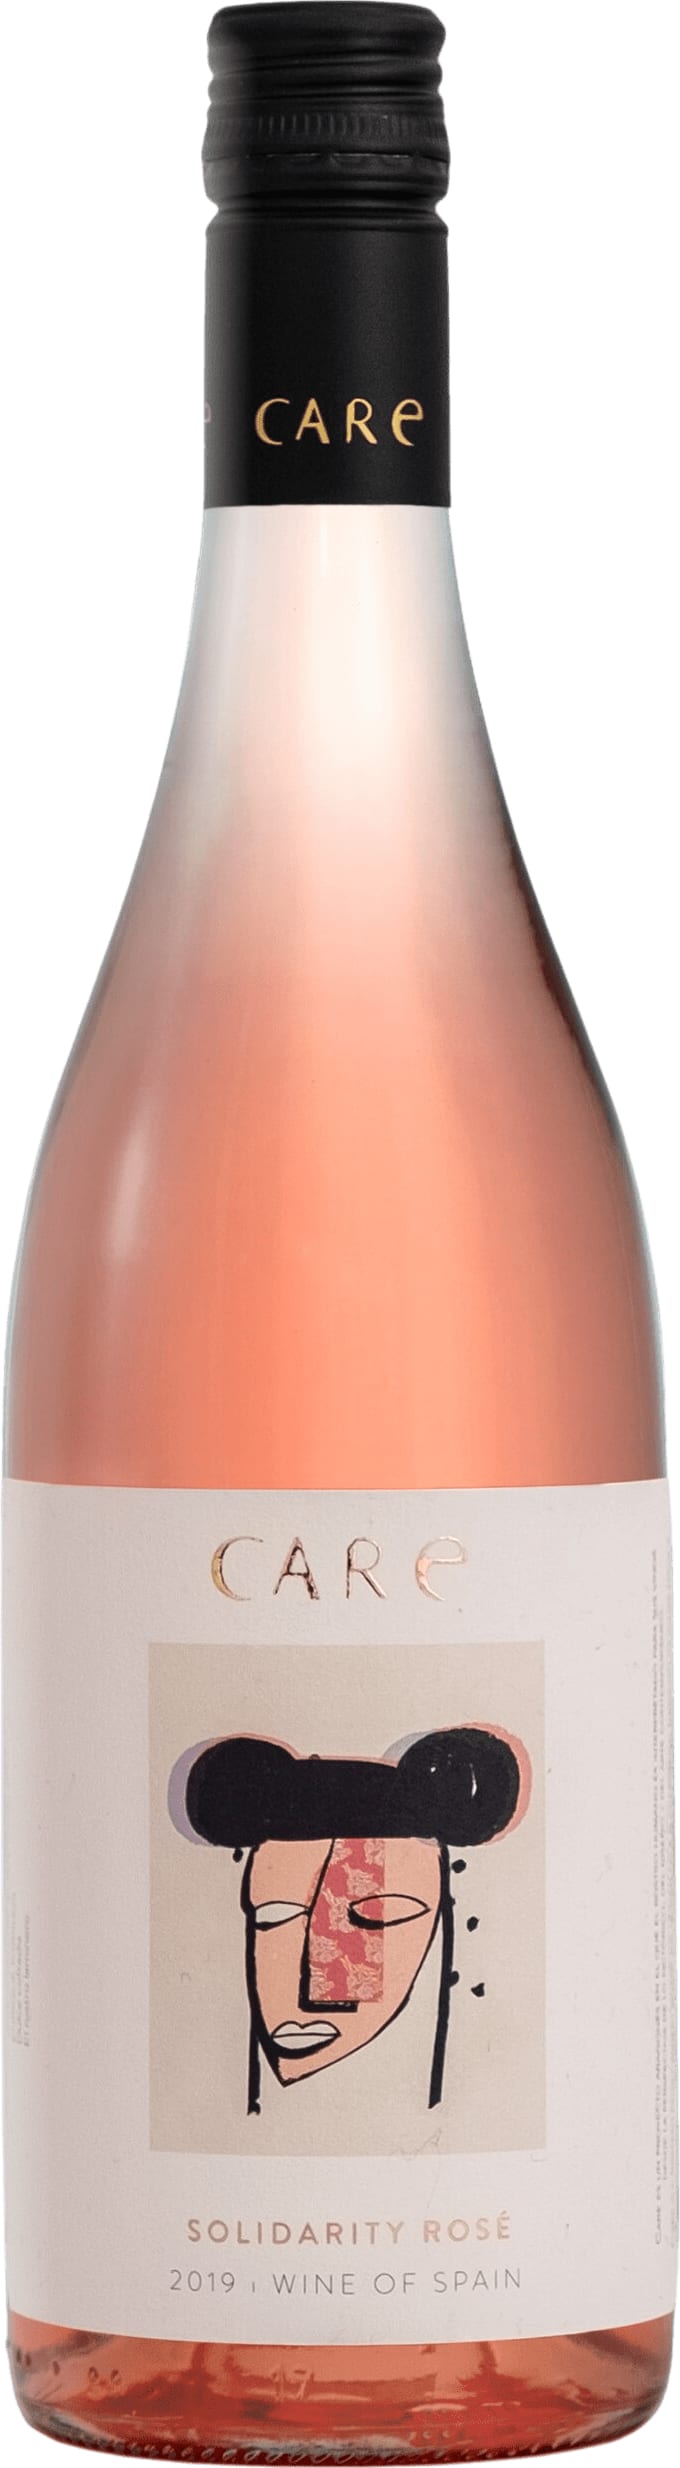 Care Solidarity Rose 2022 75cl - Buy Care Wines from GREAT WINES DIRECT wine shop